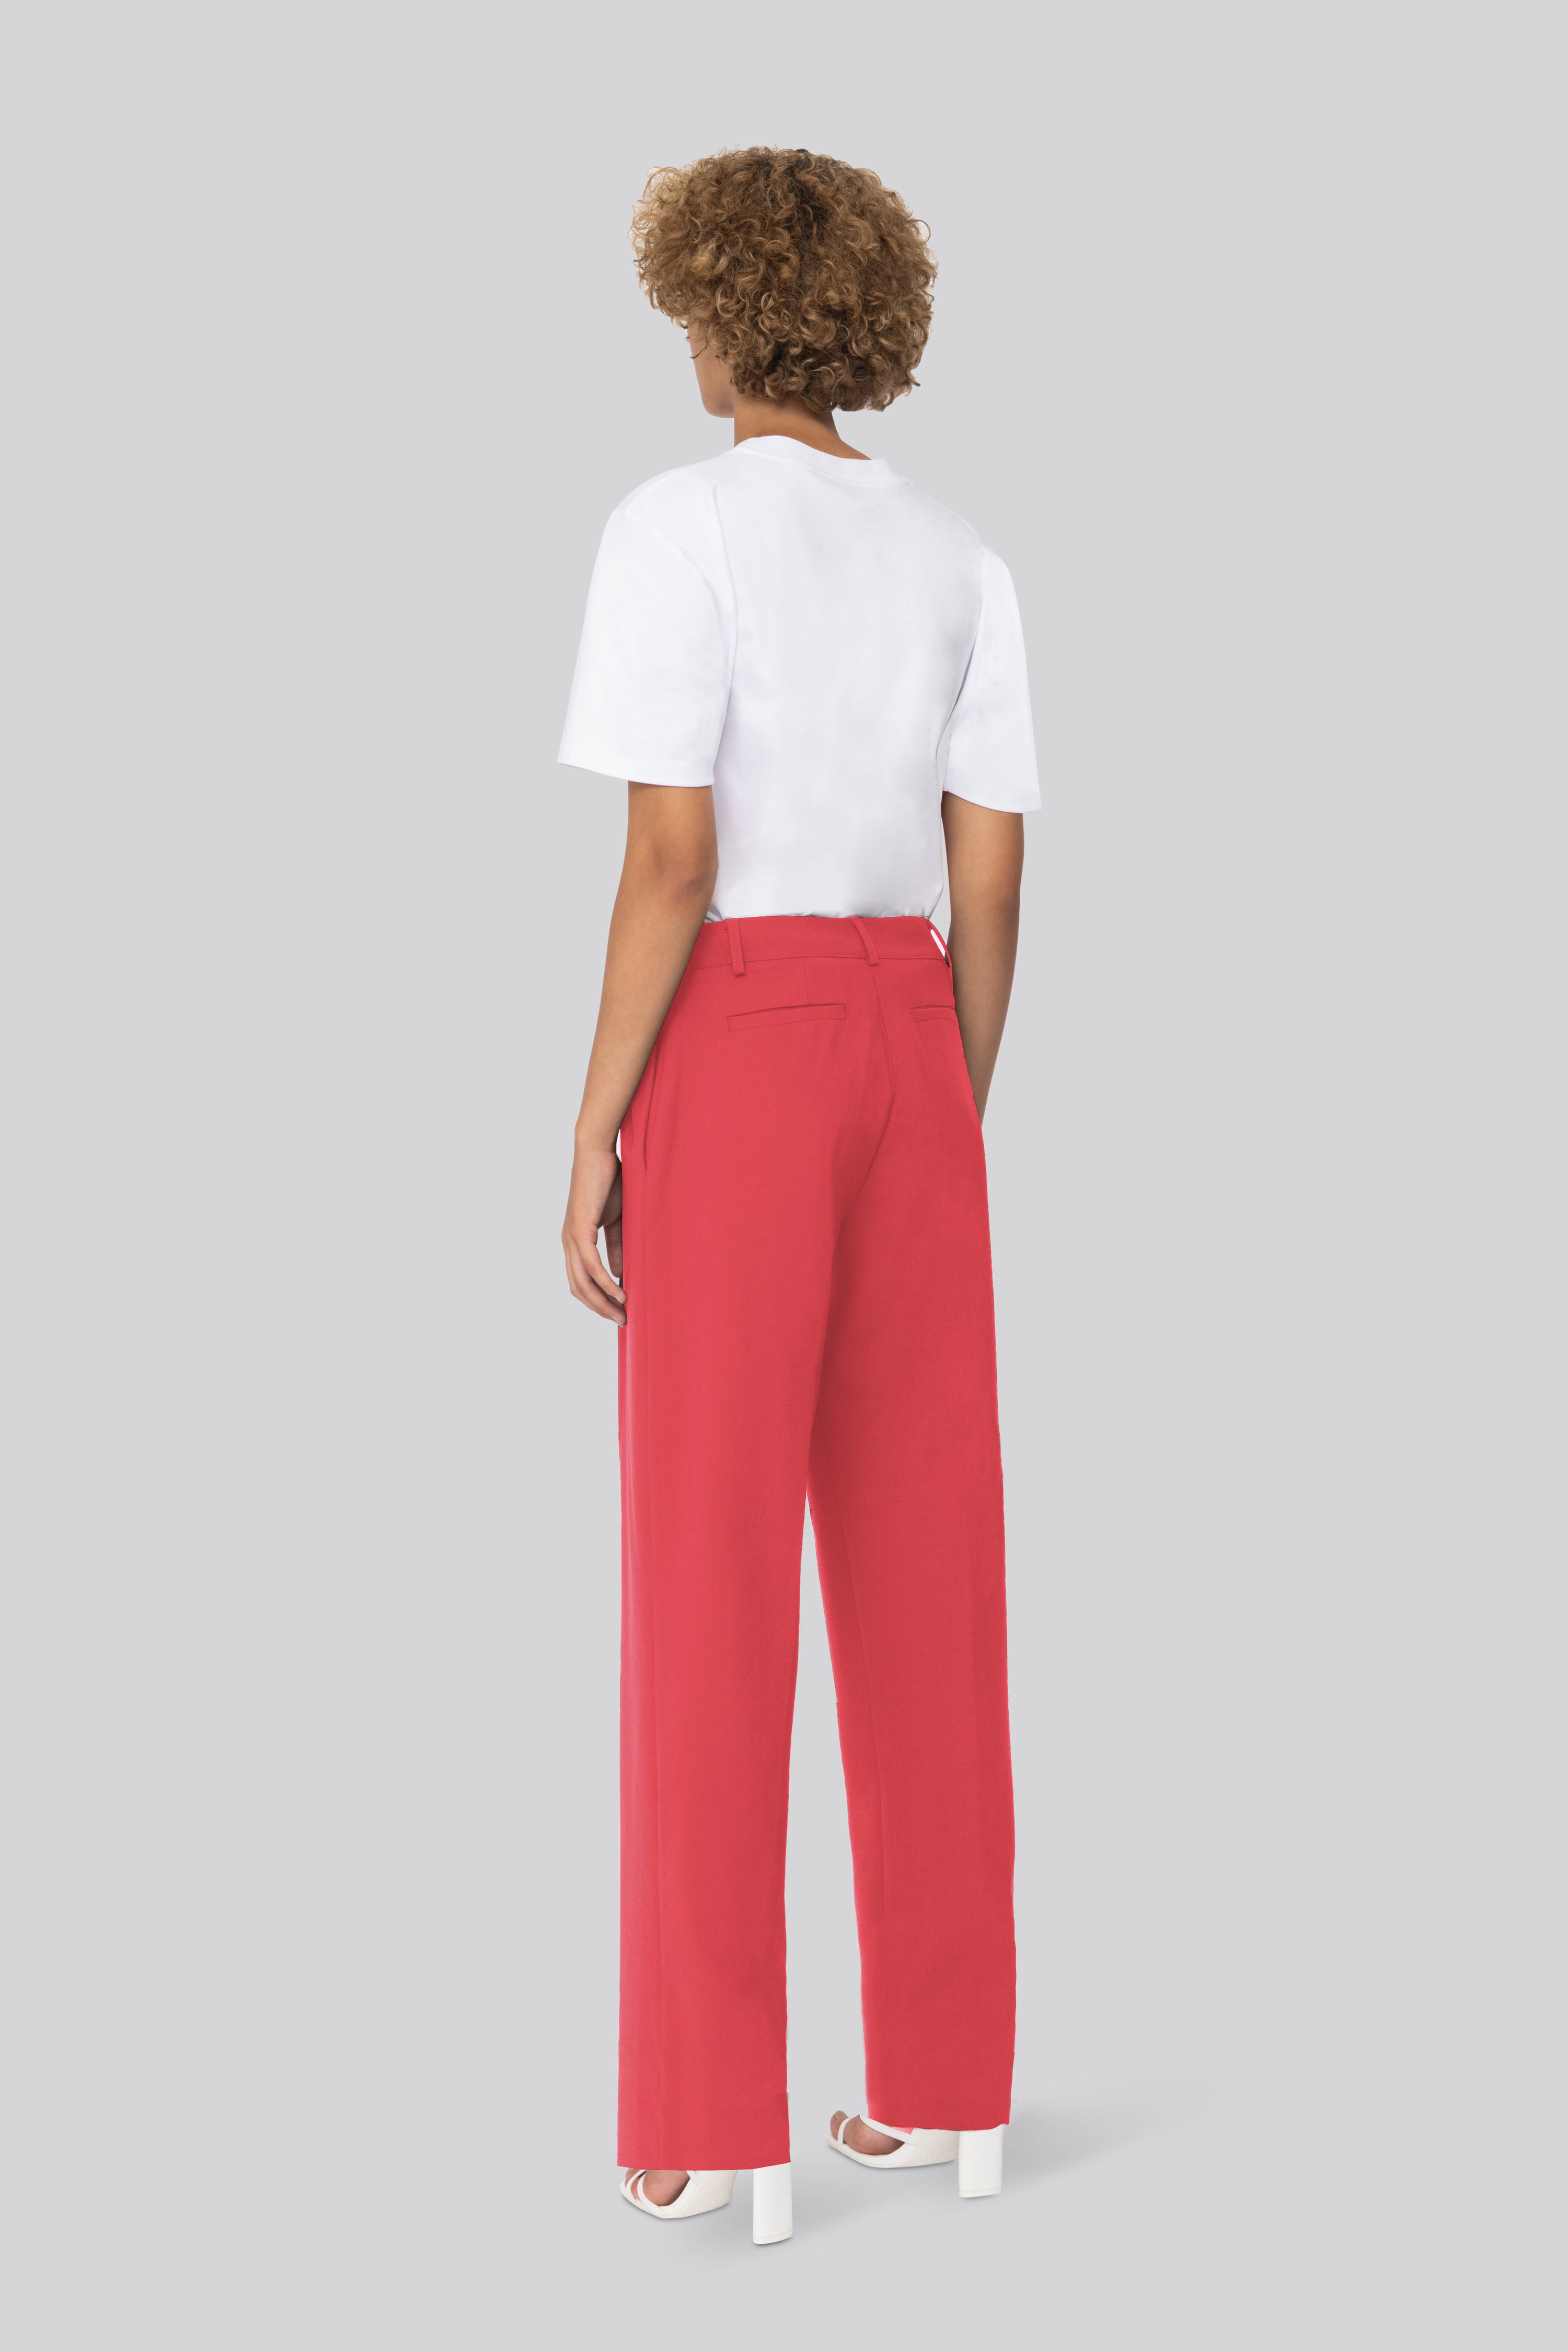 The Ruby Canvas Diane Pant